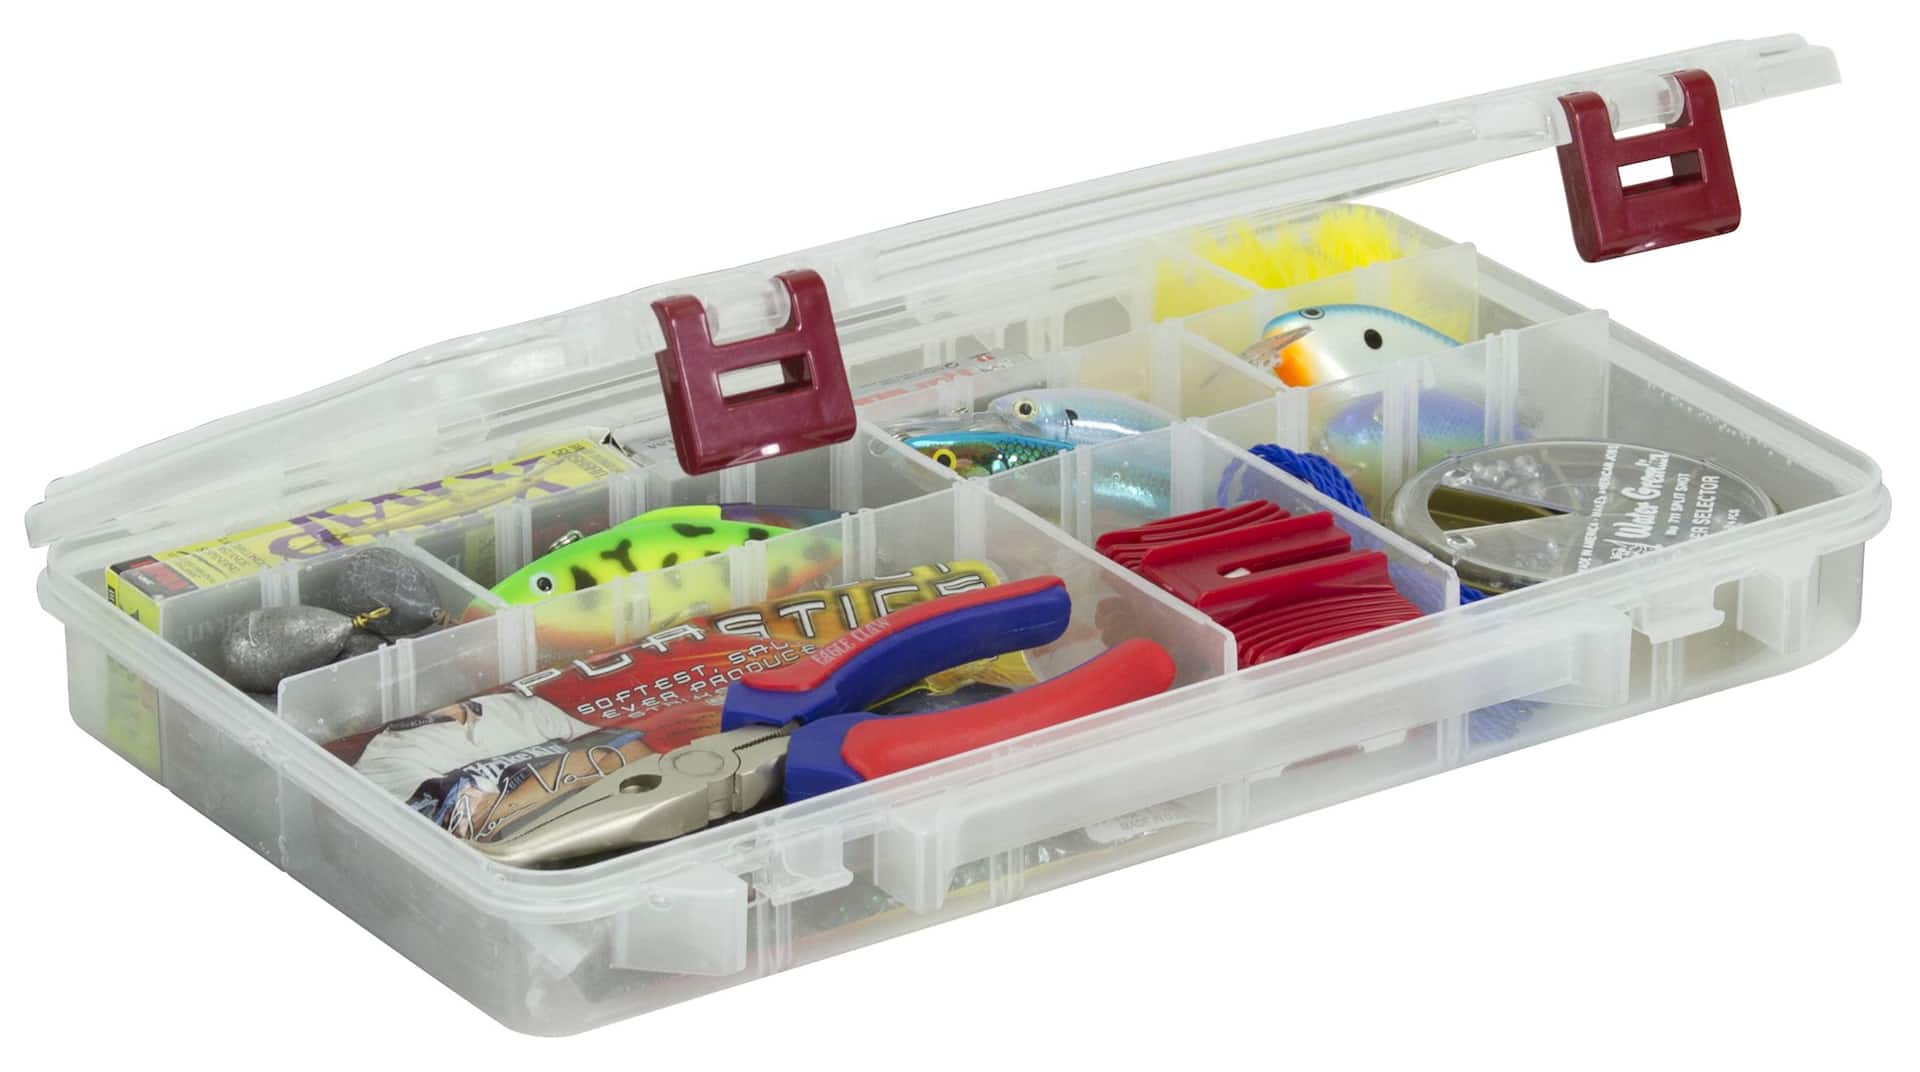 Plano Pro Latch 3500 Tackle Box with Adjustable Dividers